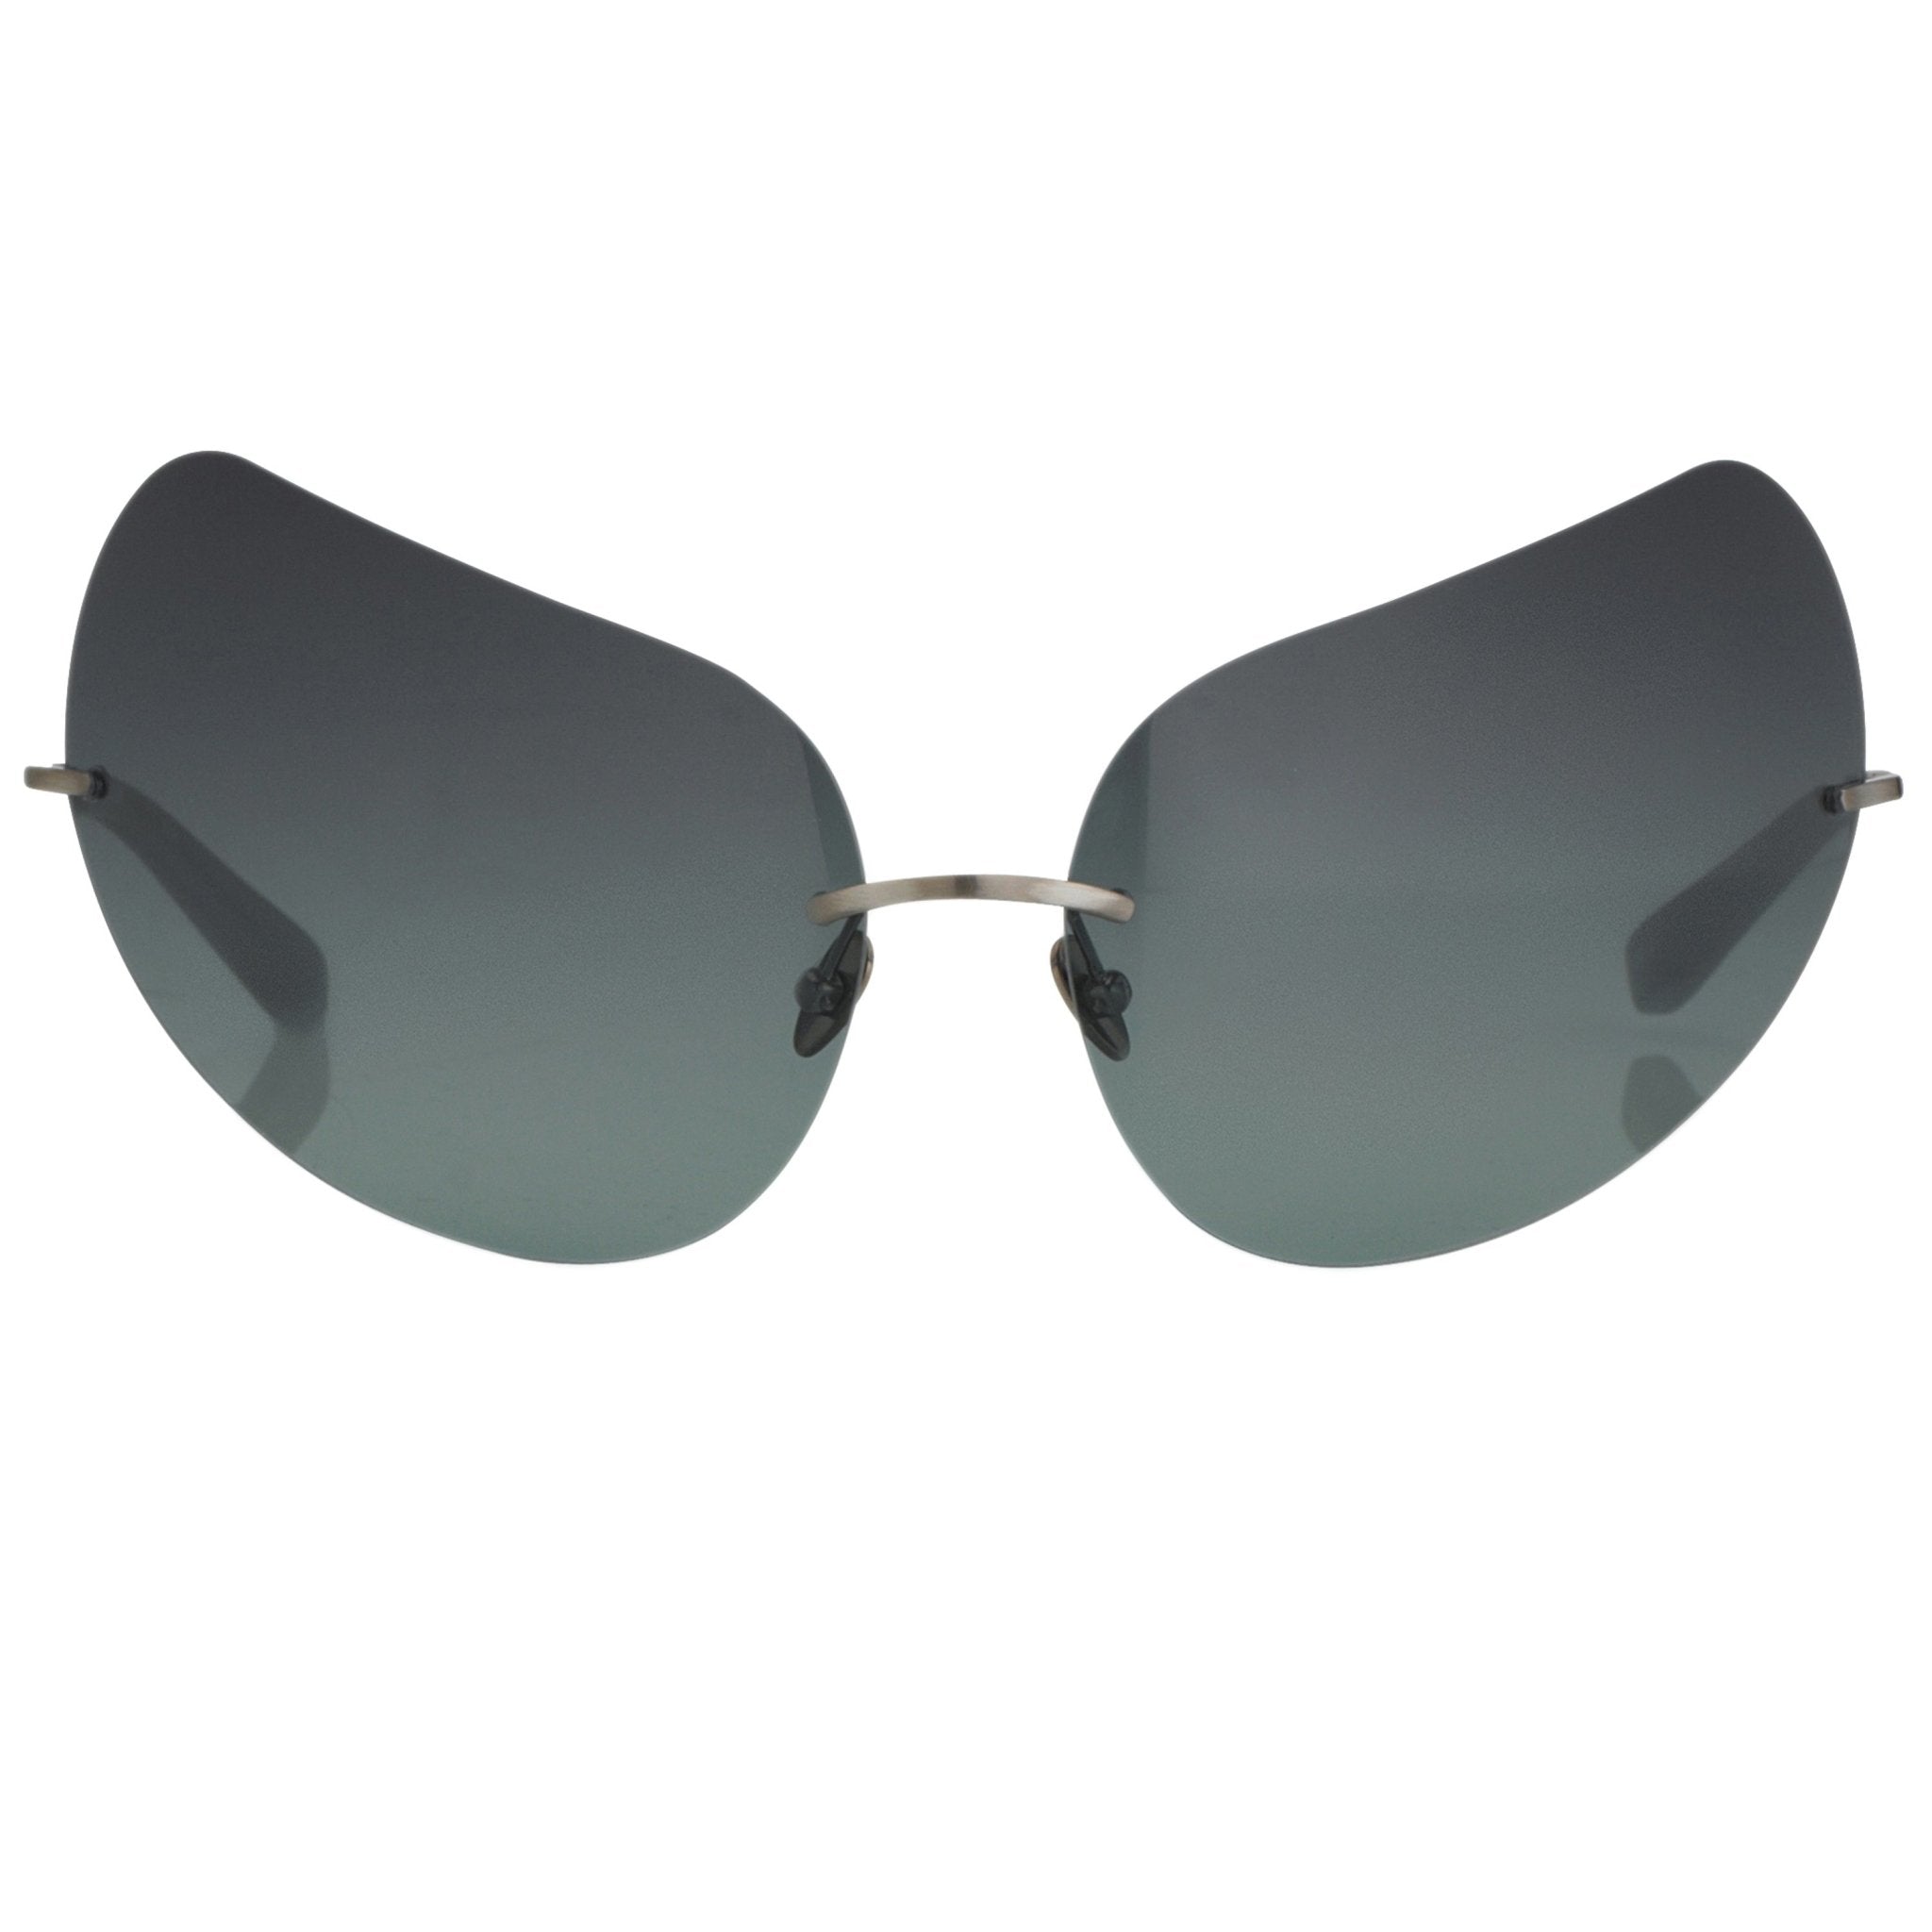 Todd Lynn Sunglasses Special Frame Brown and Dark Green Lenses Category 3 - TL5C2SUN - Watches & Crystals